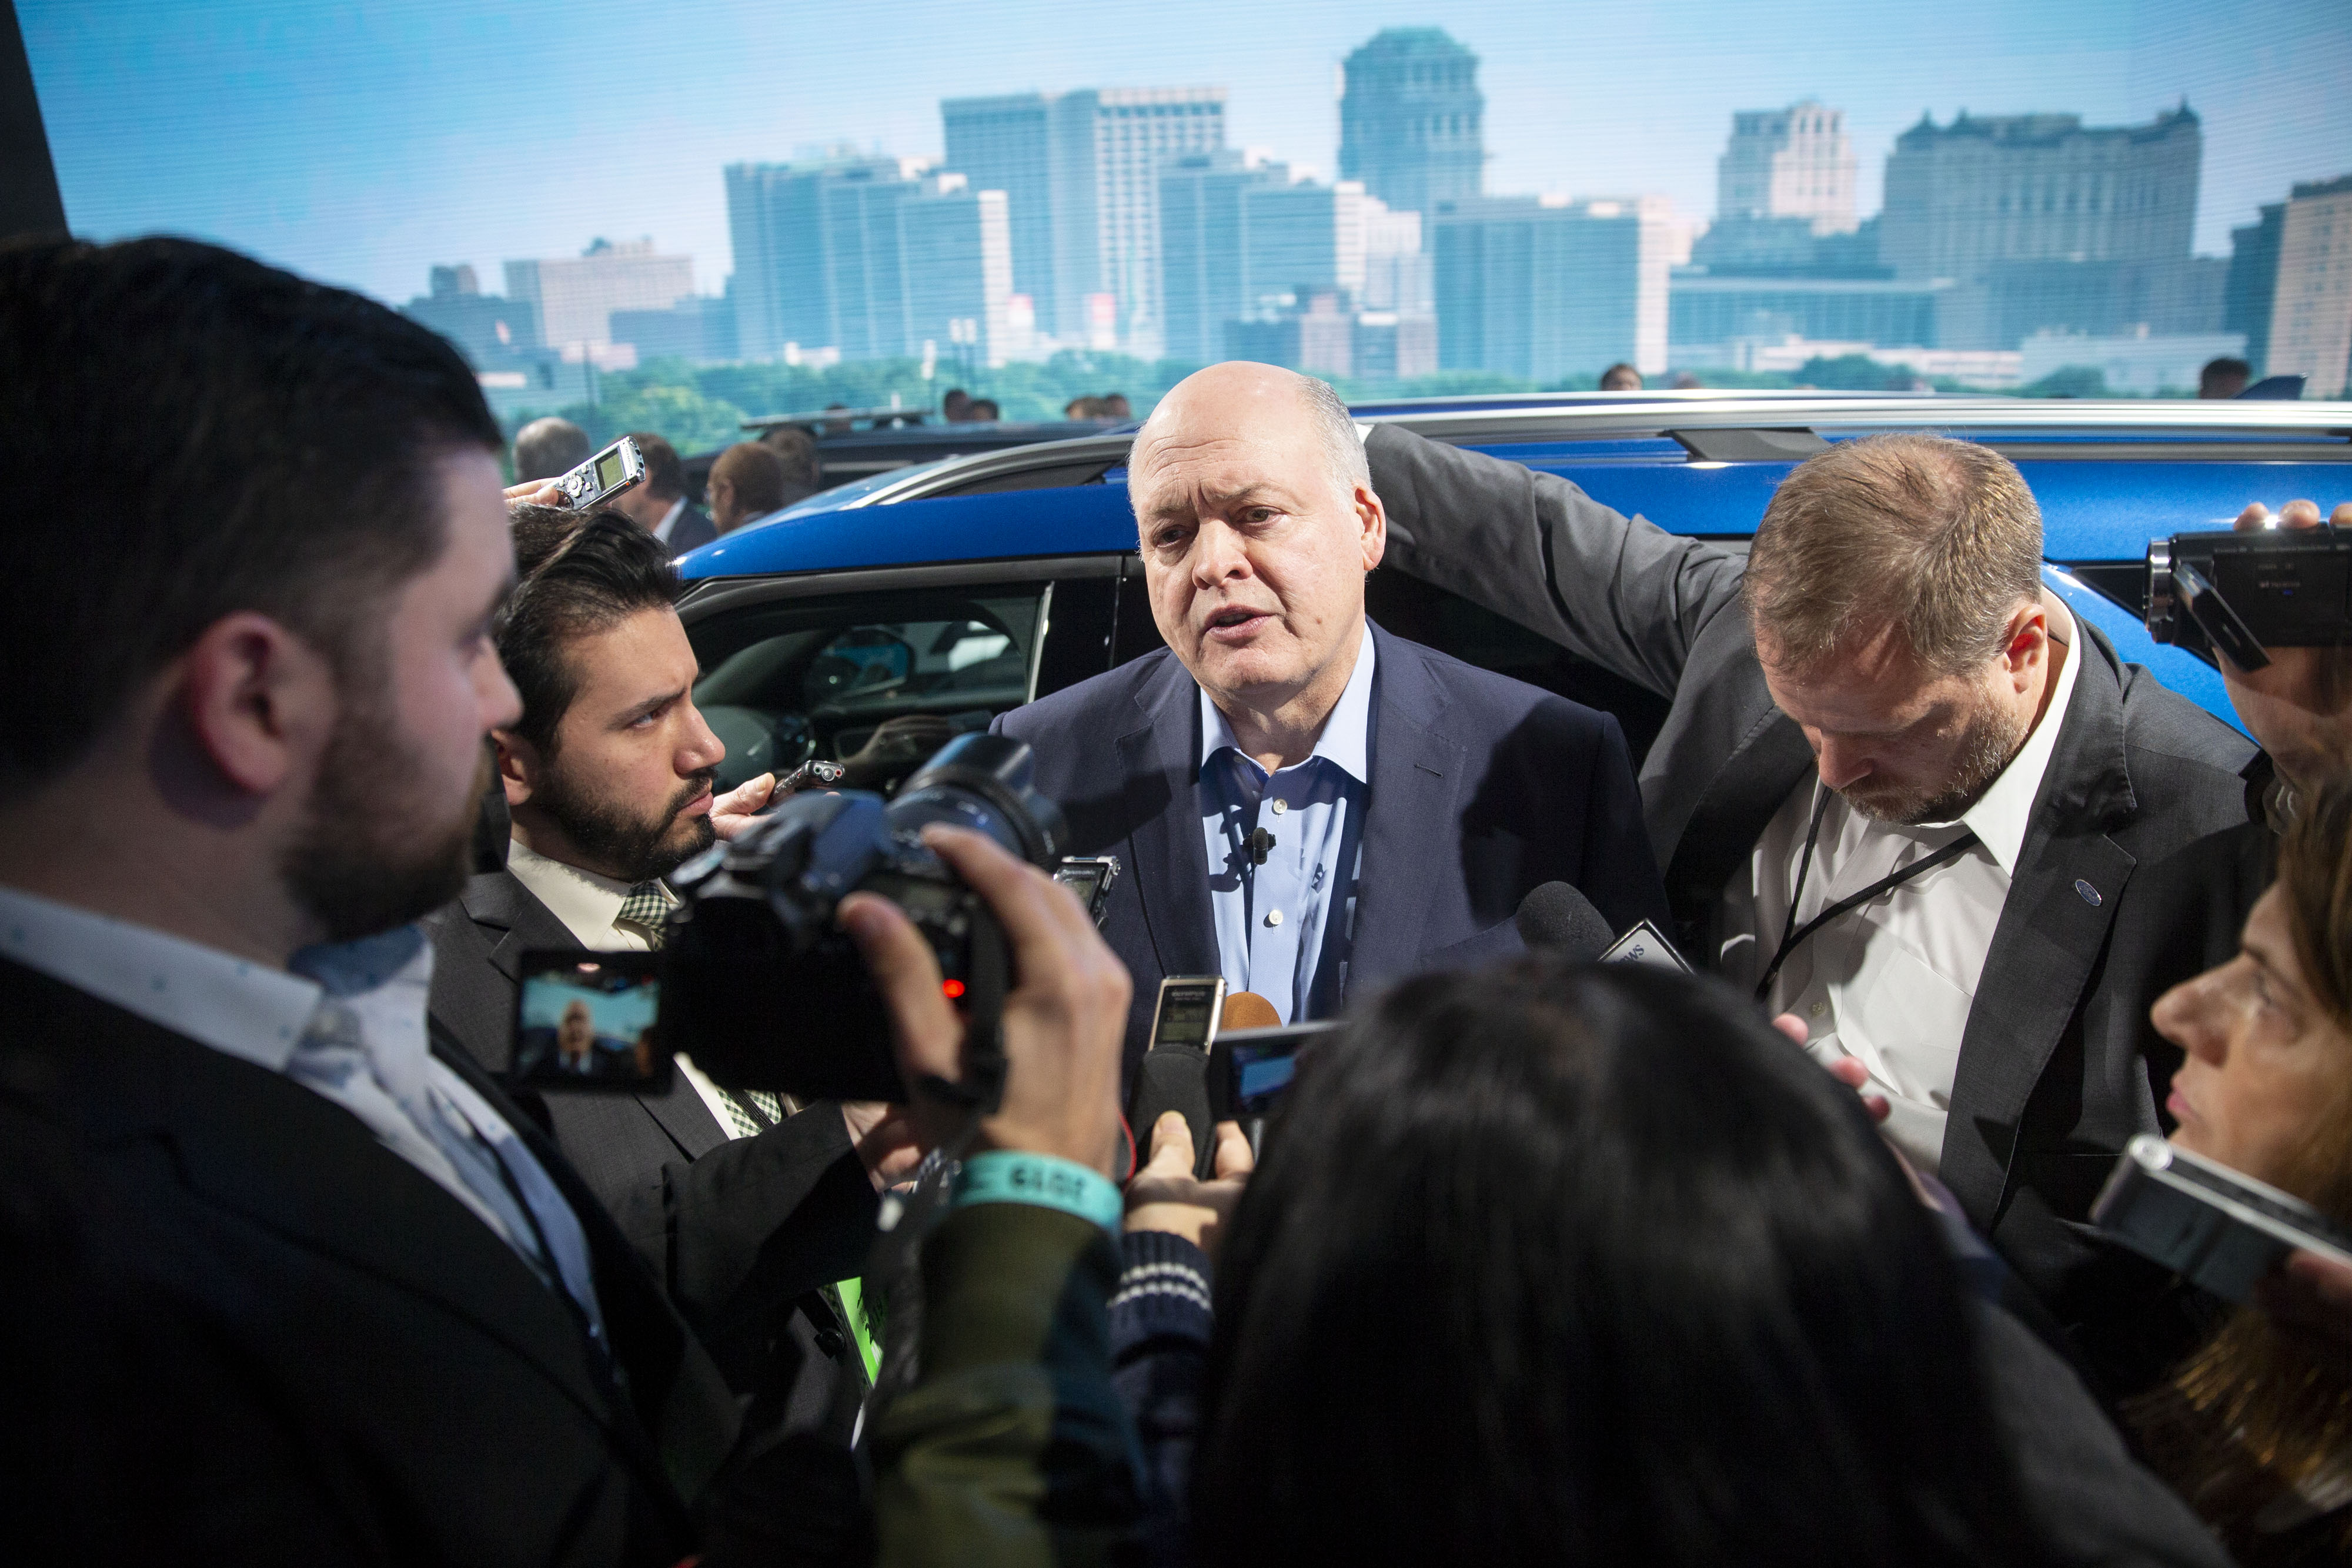 Jim Hackett, chief executive officer of Ford Motor Co., speaks to the media during the 2019 North American International Auto Show (NAIAS) in Detroit, Michigan, U.S., on Monday, Jan. 14, 2019. Ford debuted the most powerful vehicle it has ever made: The 2020 Ford Shelby GT500. The high-performance Mustang variant comes with a supercharged 5.2-liter V8 and more than 700 horsepower. Photographer: Daniel Acker/Bloomberg